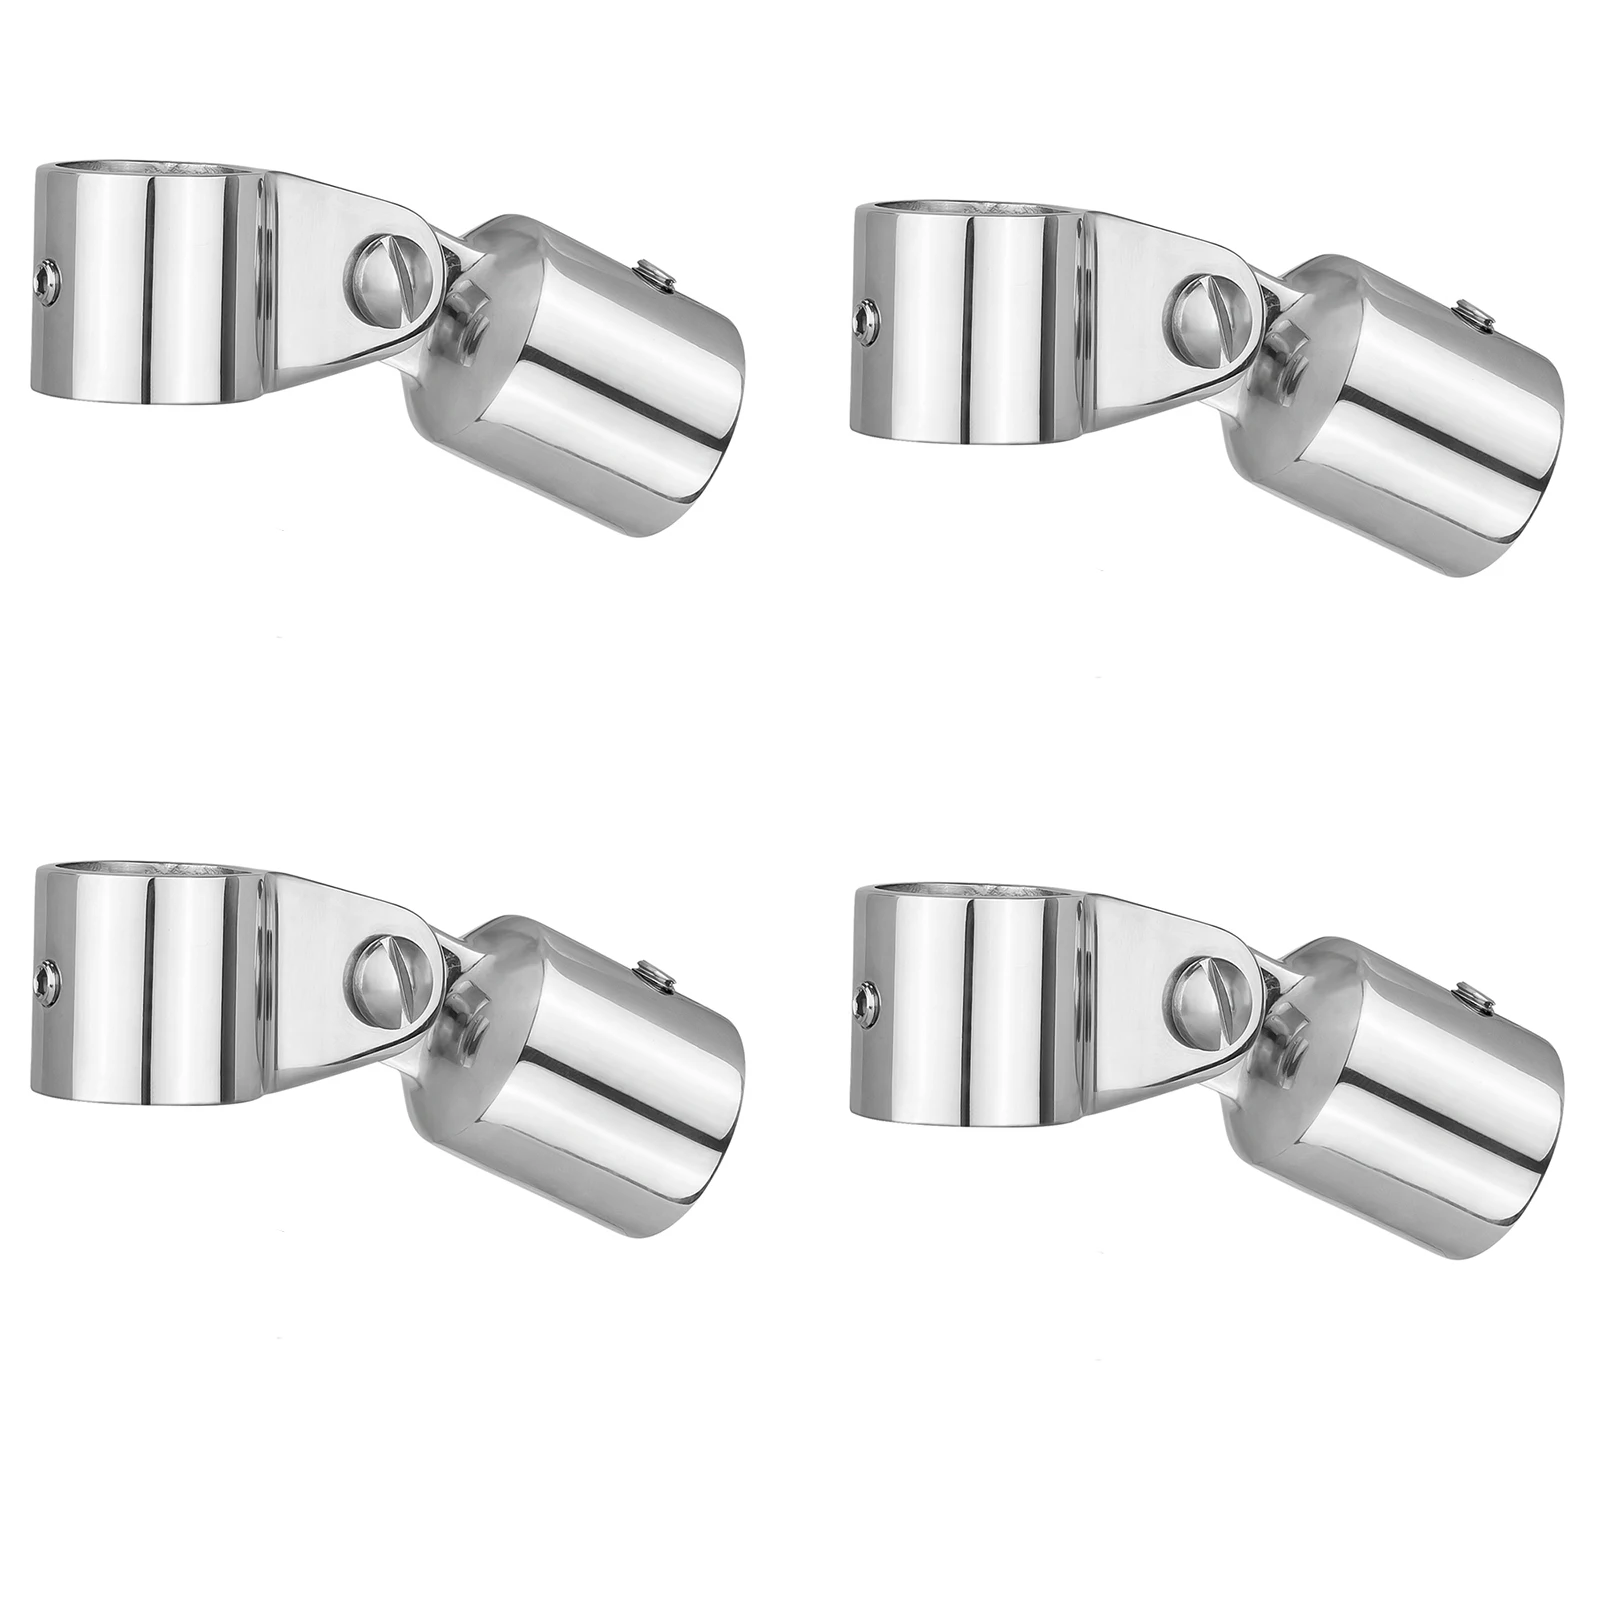 Bimini Top Jaw Slide and Eye End Cap, Bimini Top Hardware, Fits 1.25 Inch /32mm OD Round Tube, 316 Stainless Steel （4 or 6 Sets)